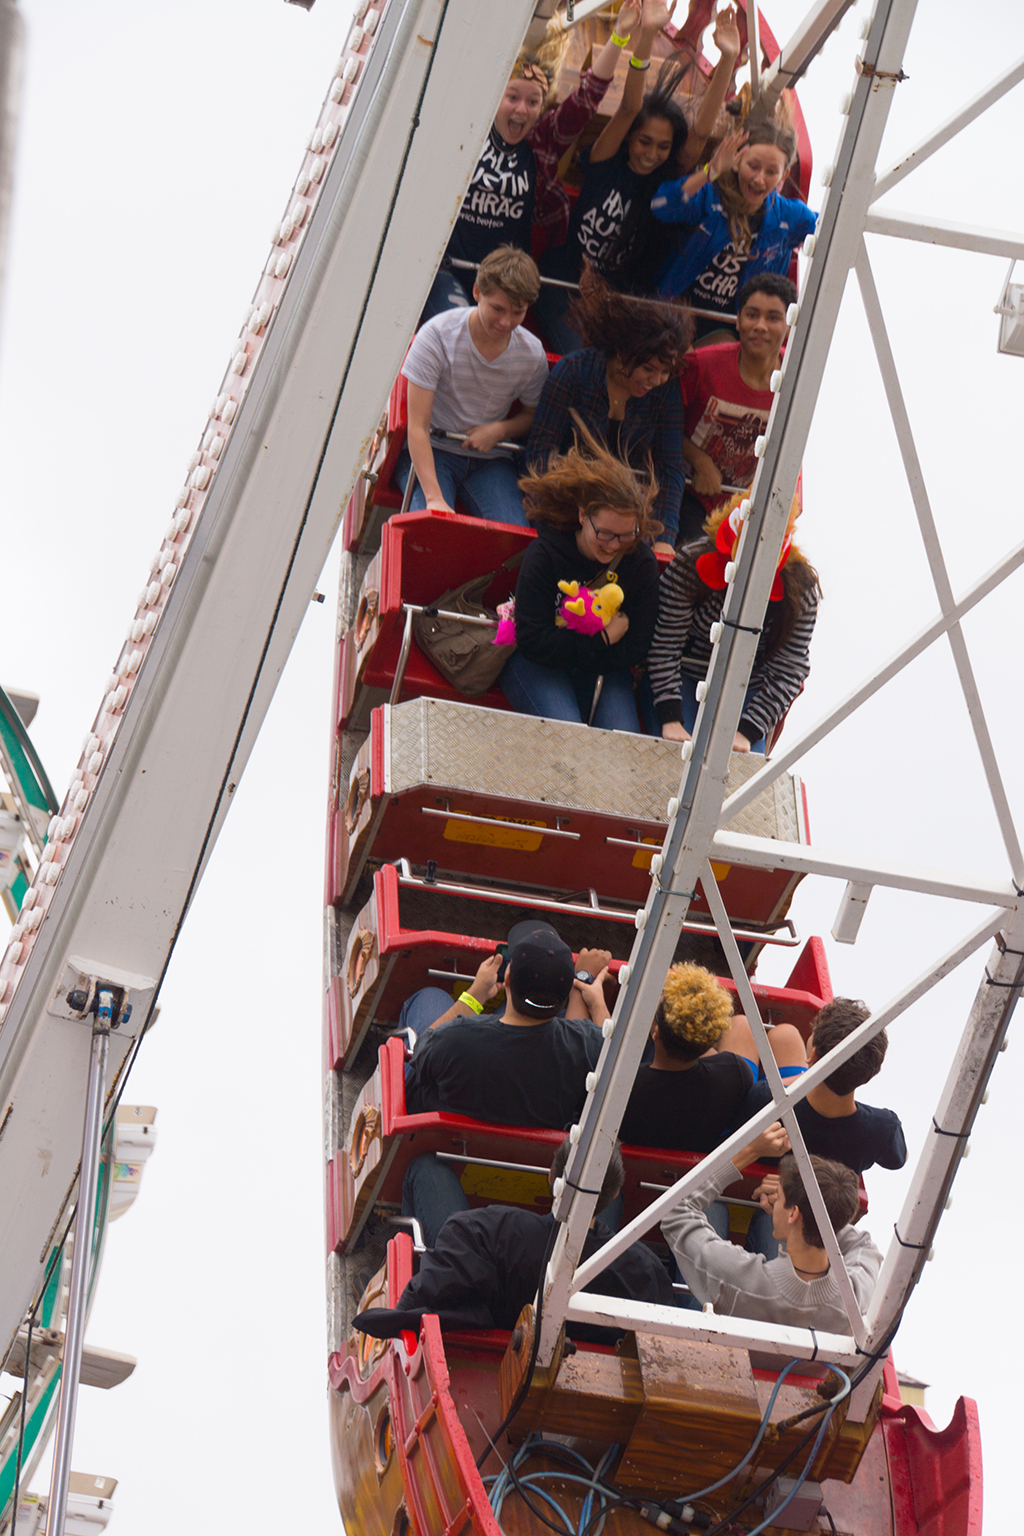 Students on a carnival ride during Students Day at Wurstfest